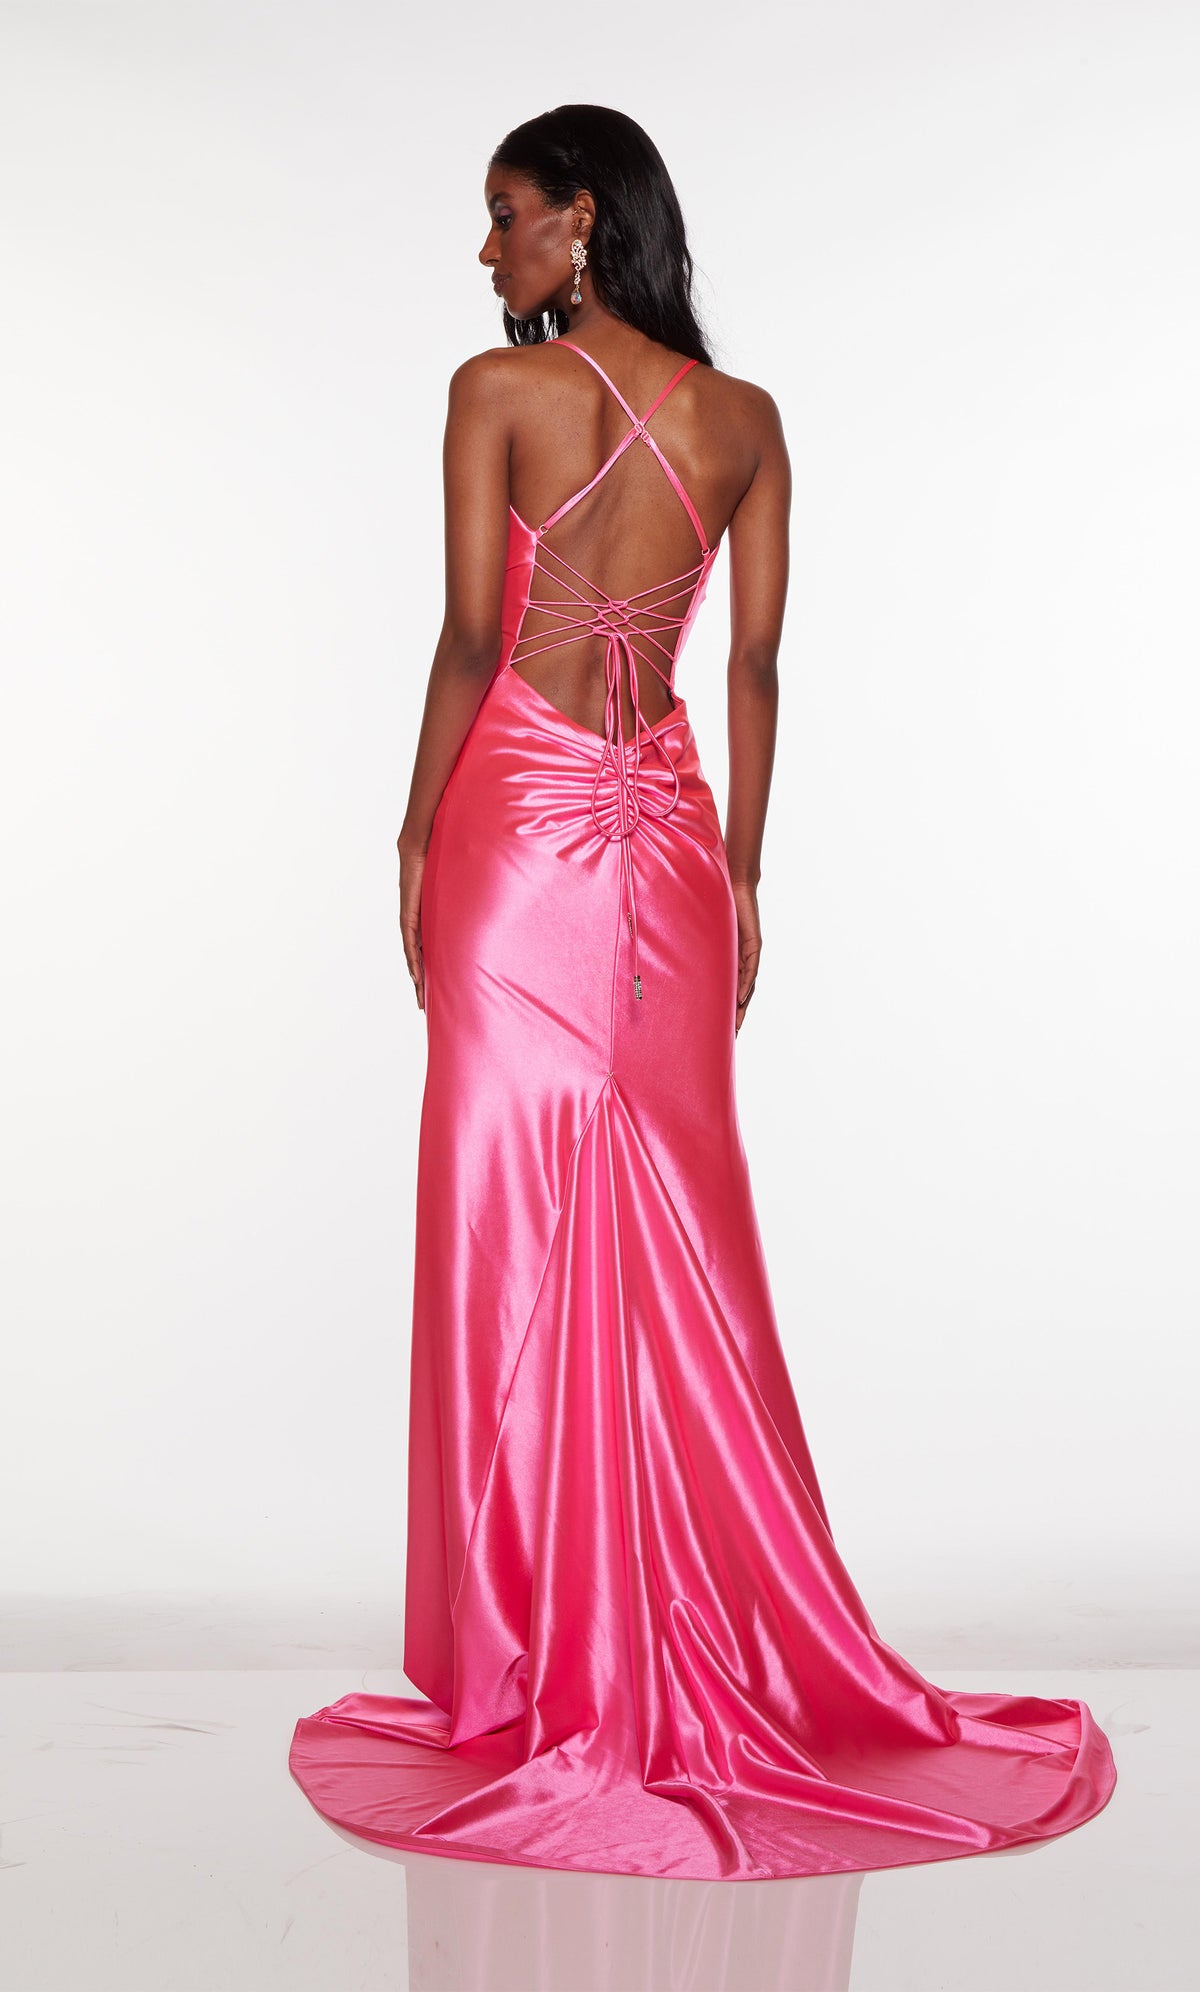 Strappy back satin formal dress with a long train in hot pink.